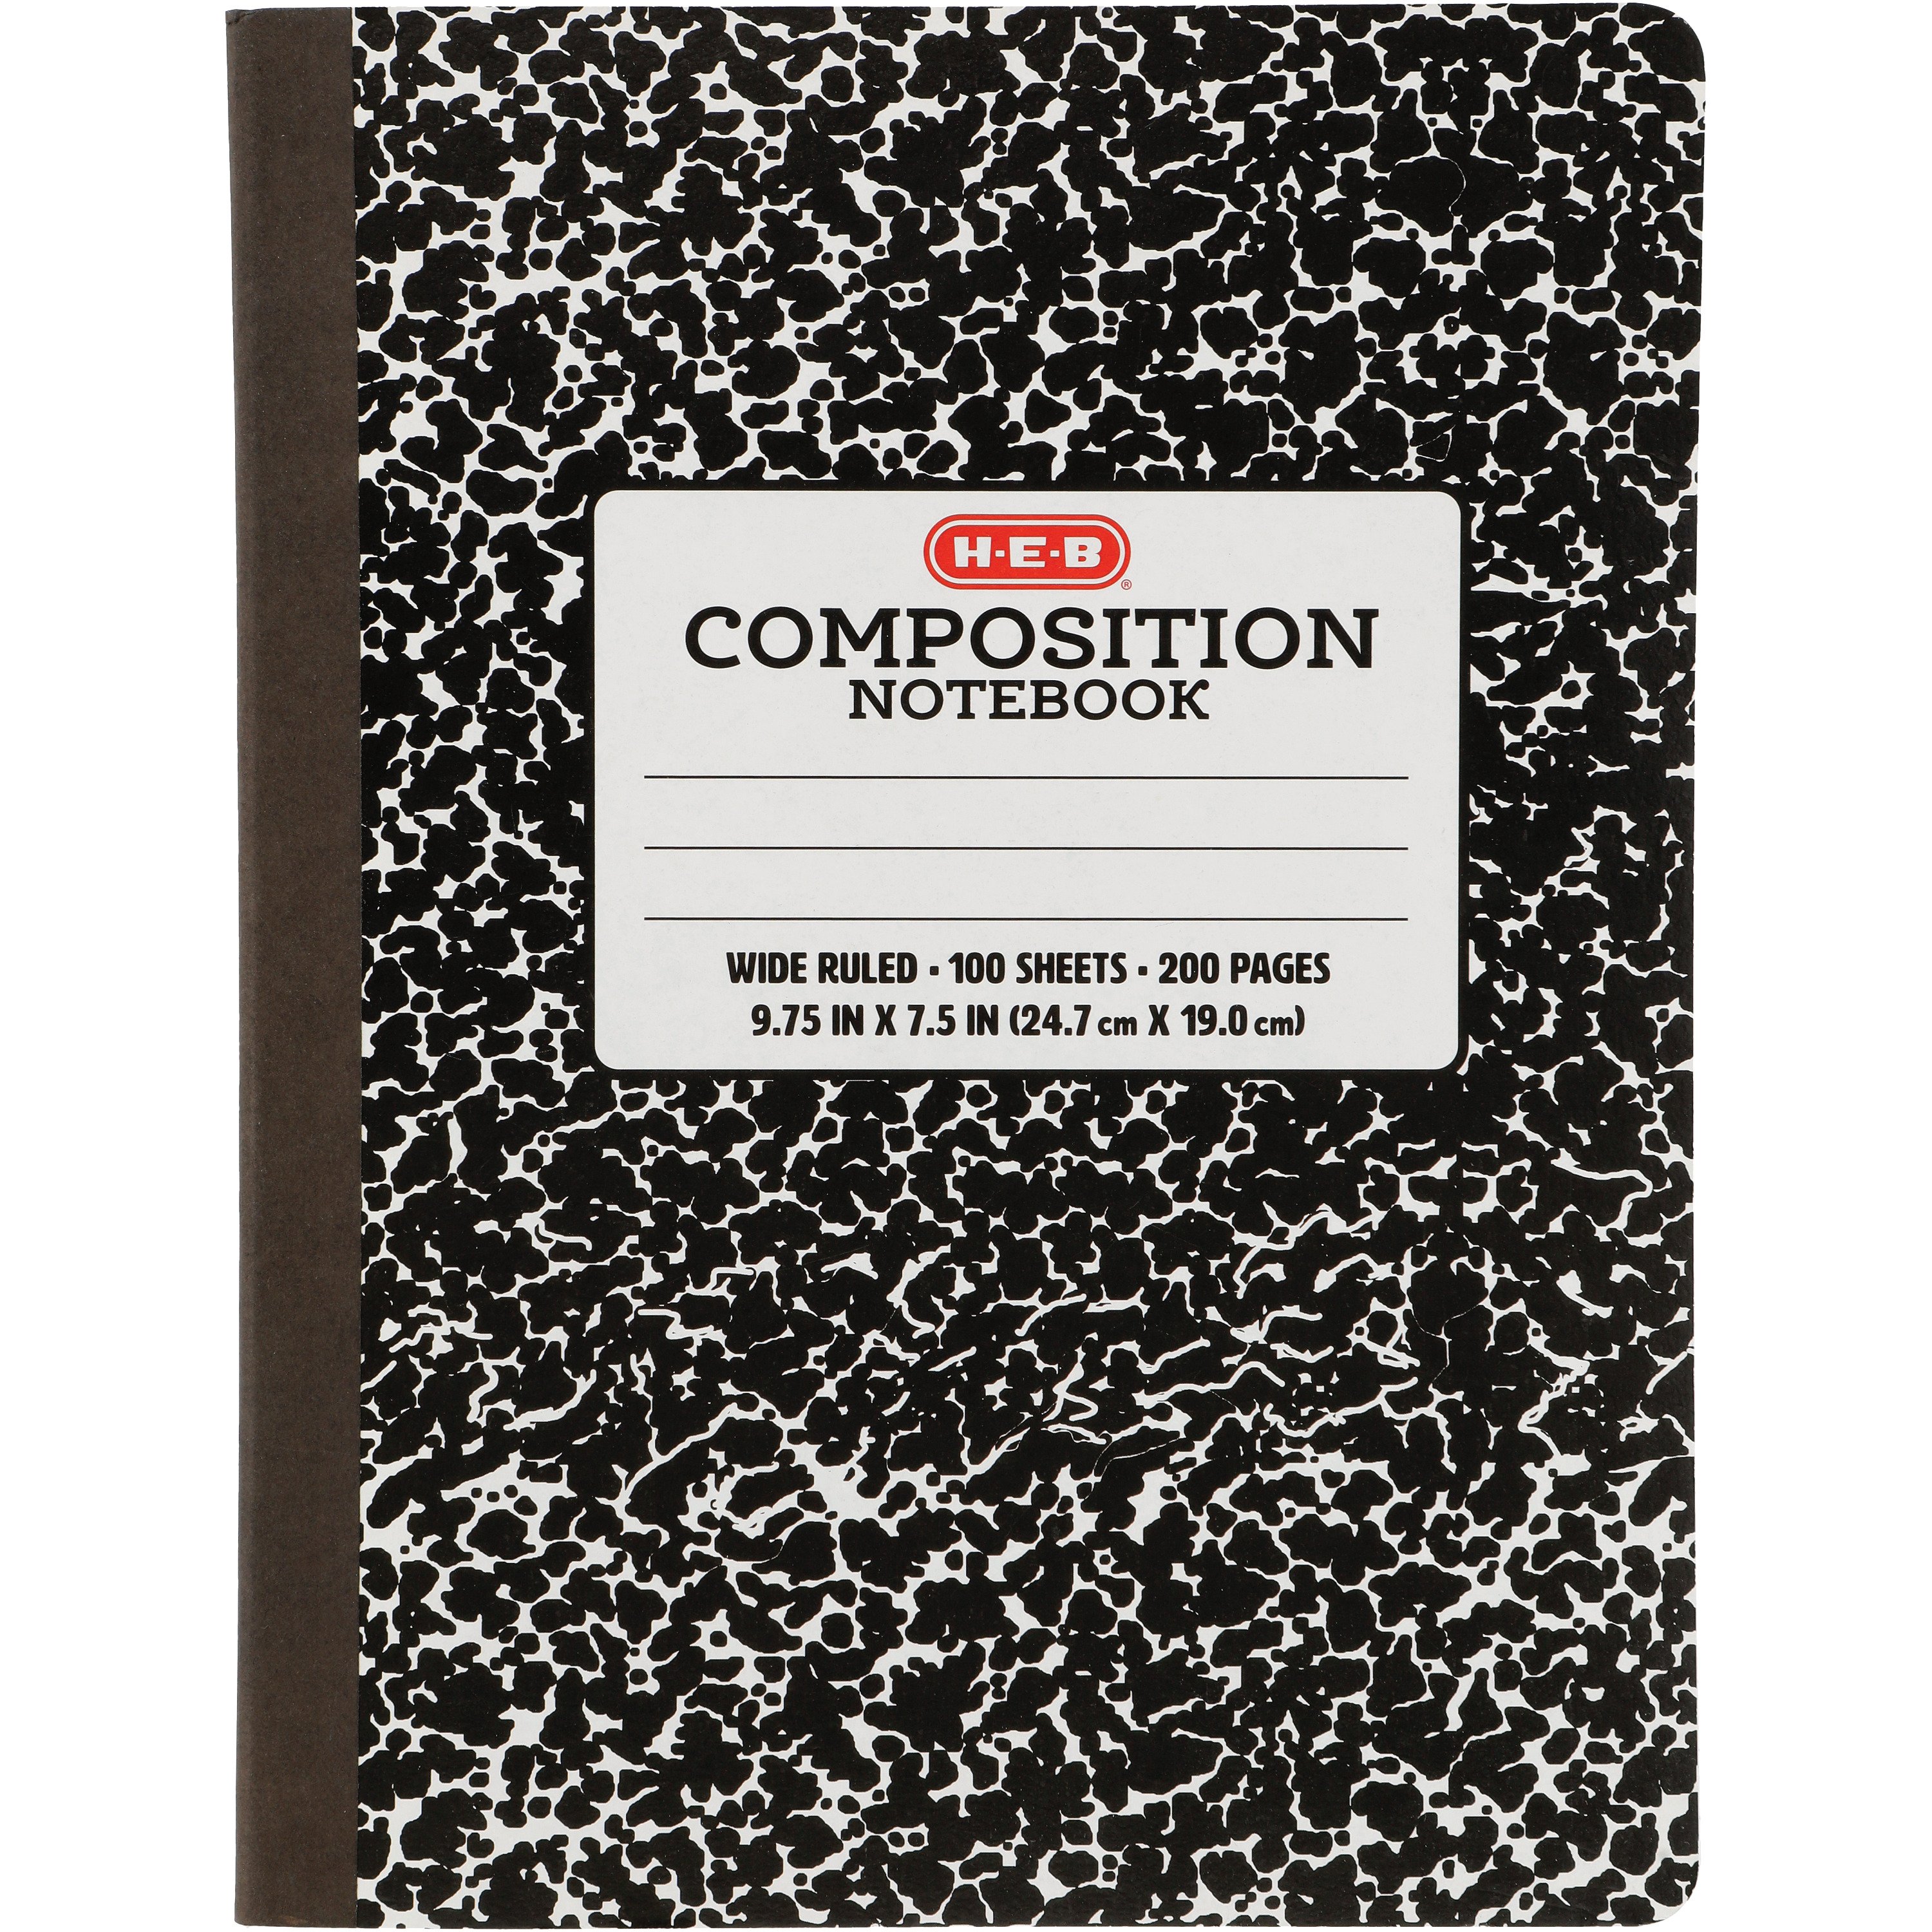 H-E-B Wide Rule Composition Notebook Black Marble Shop School & Office Supplies at H-E-B